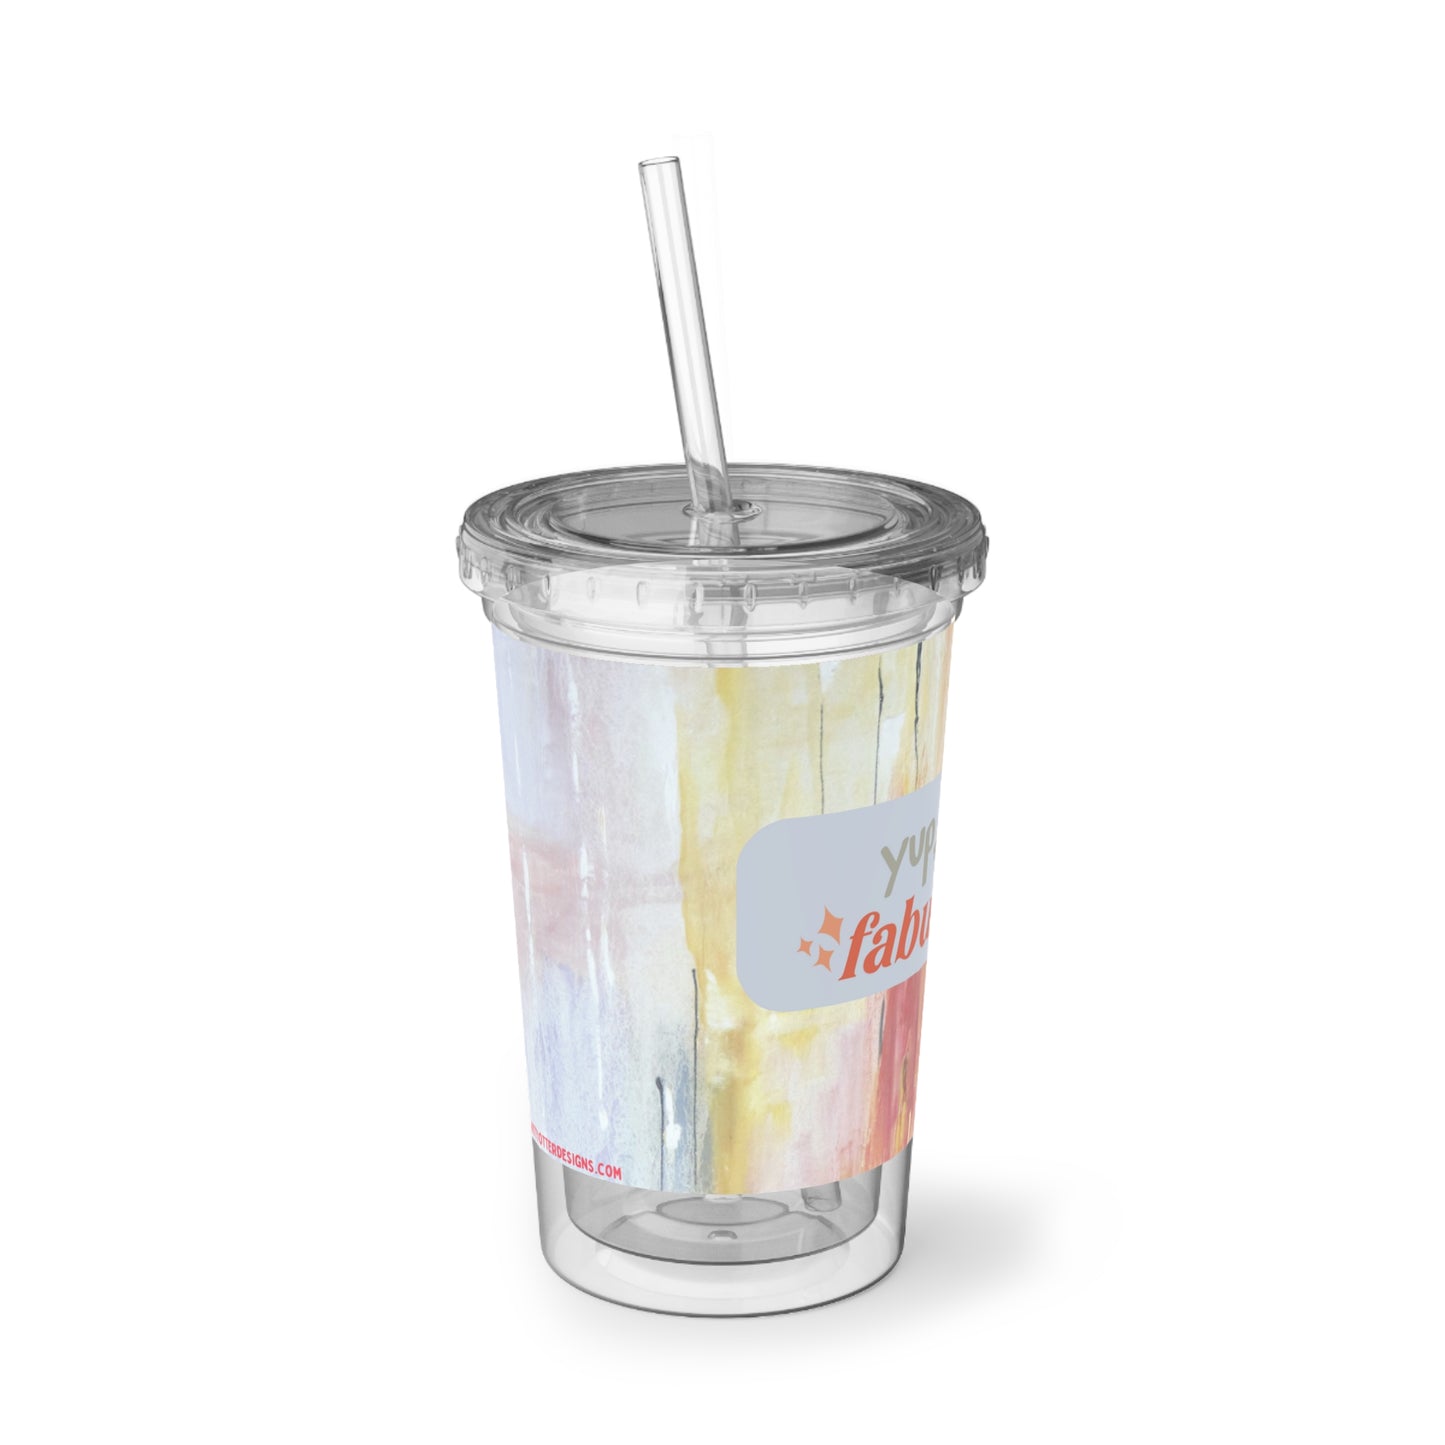 Still fabulous quote cup /sassy quote tumbler